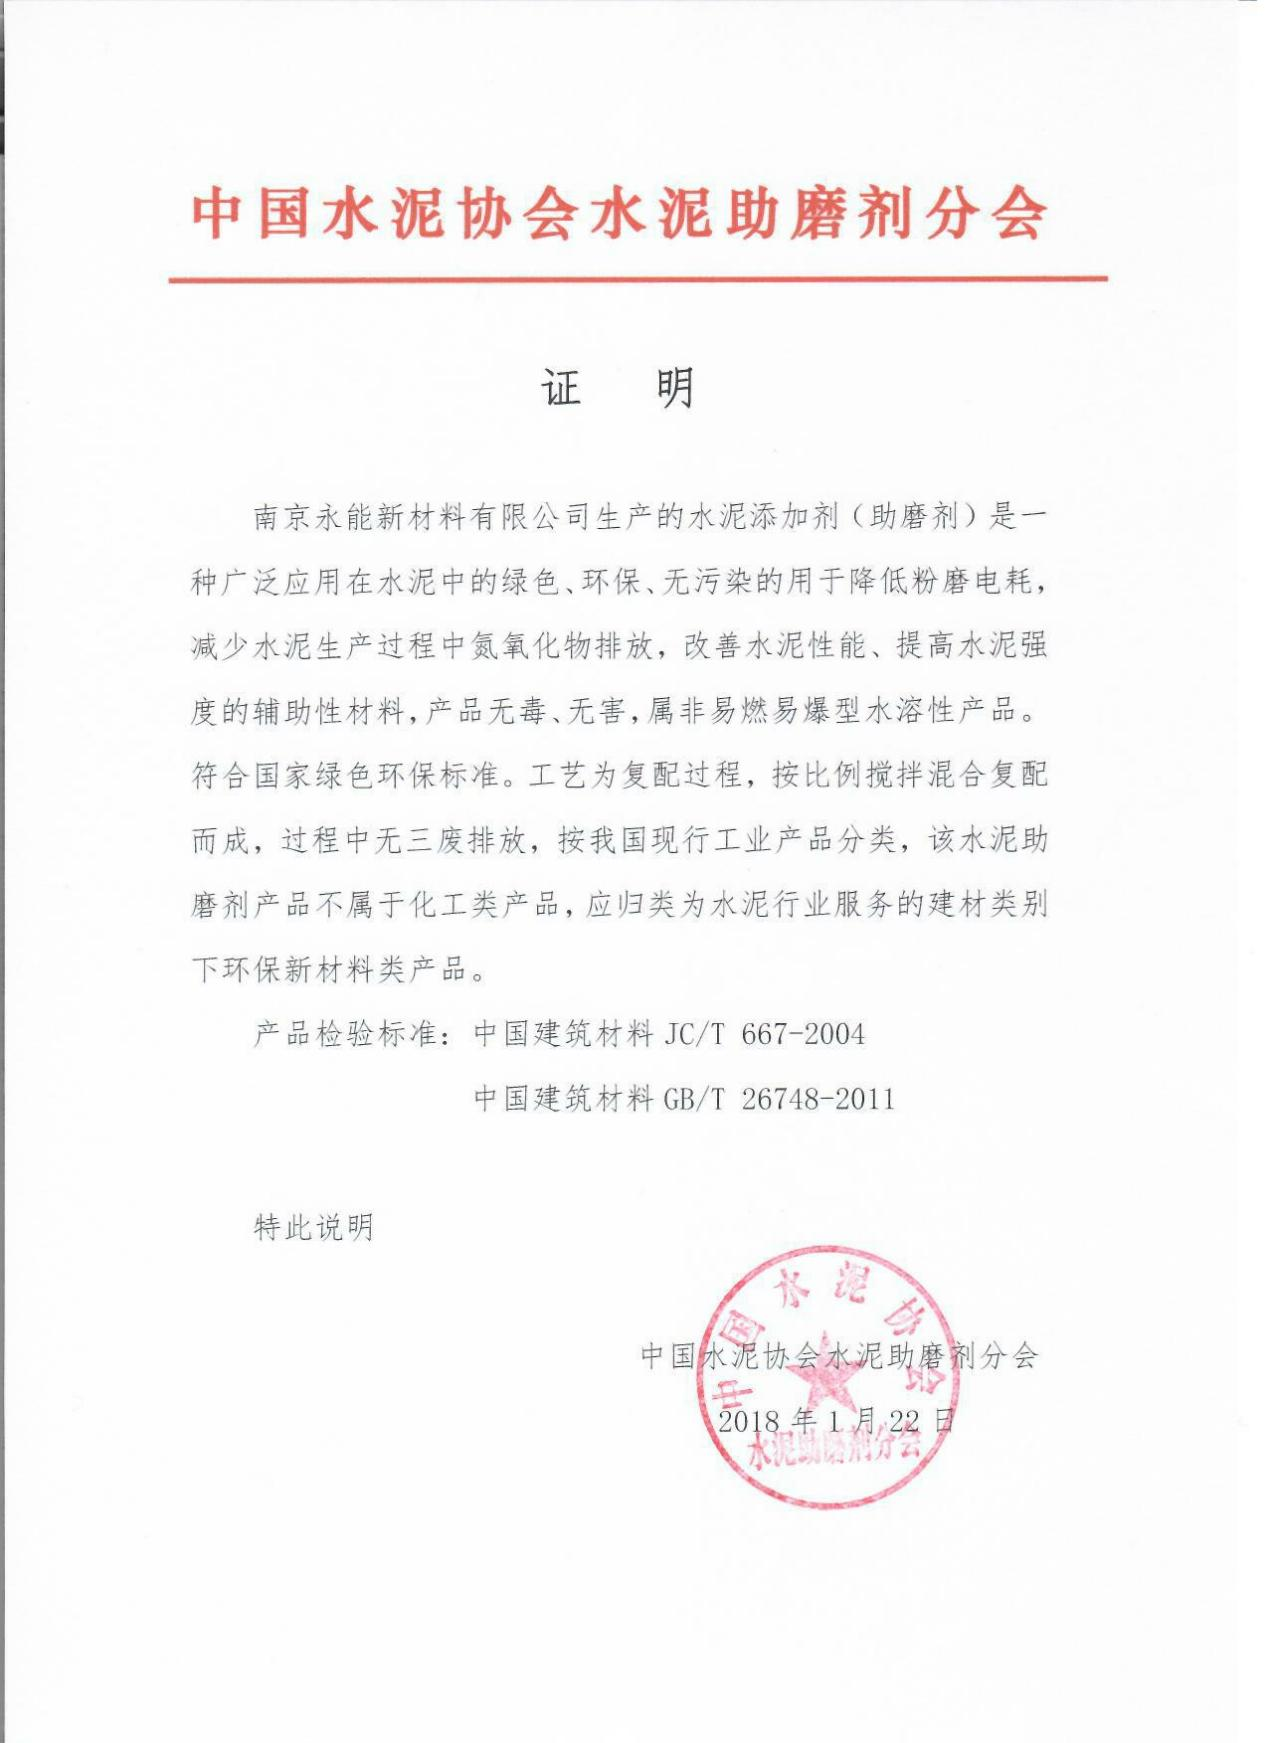 Certificate of China Cement Association Cement Grinding Aid Branch